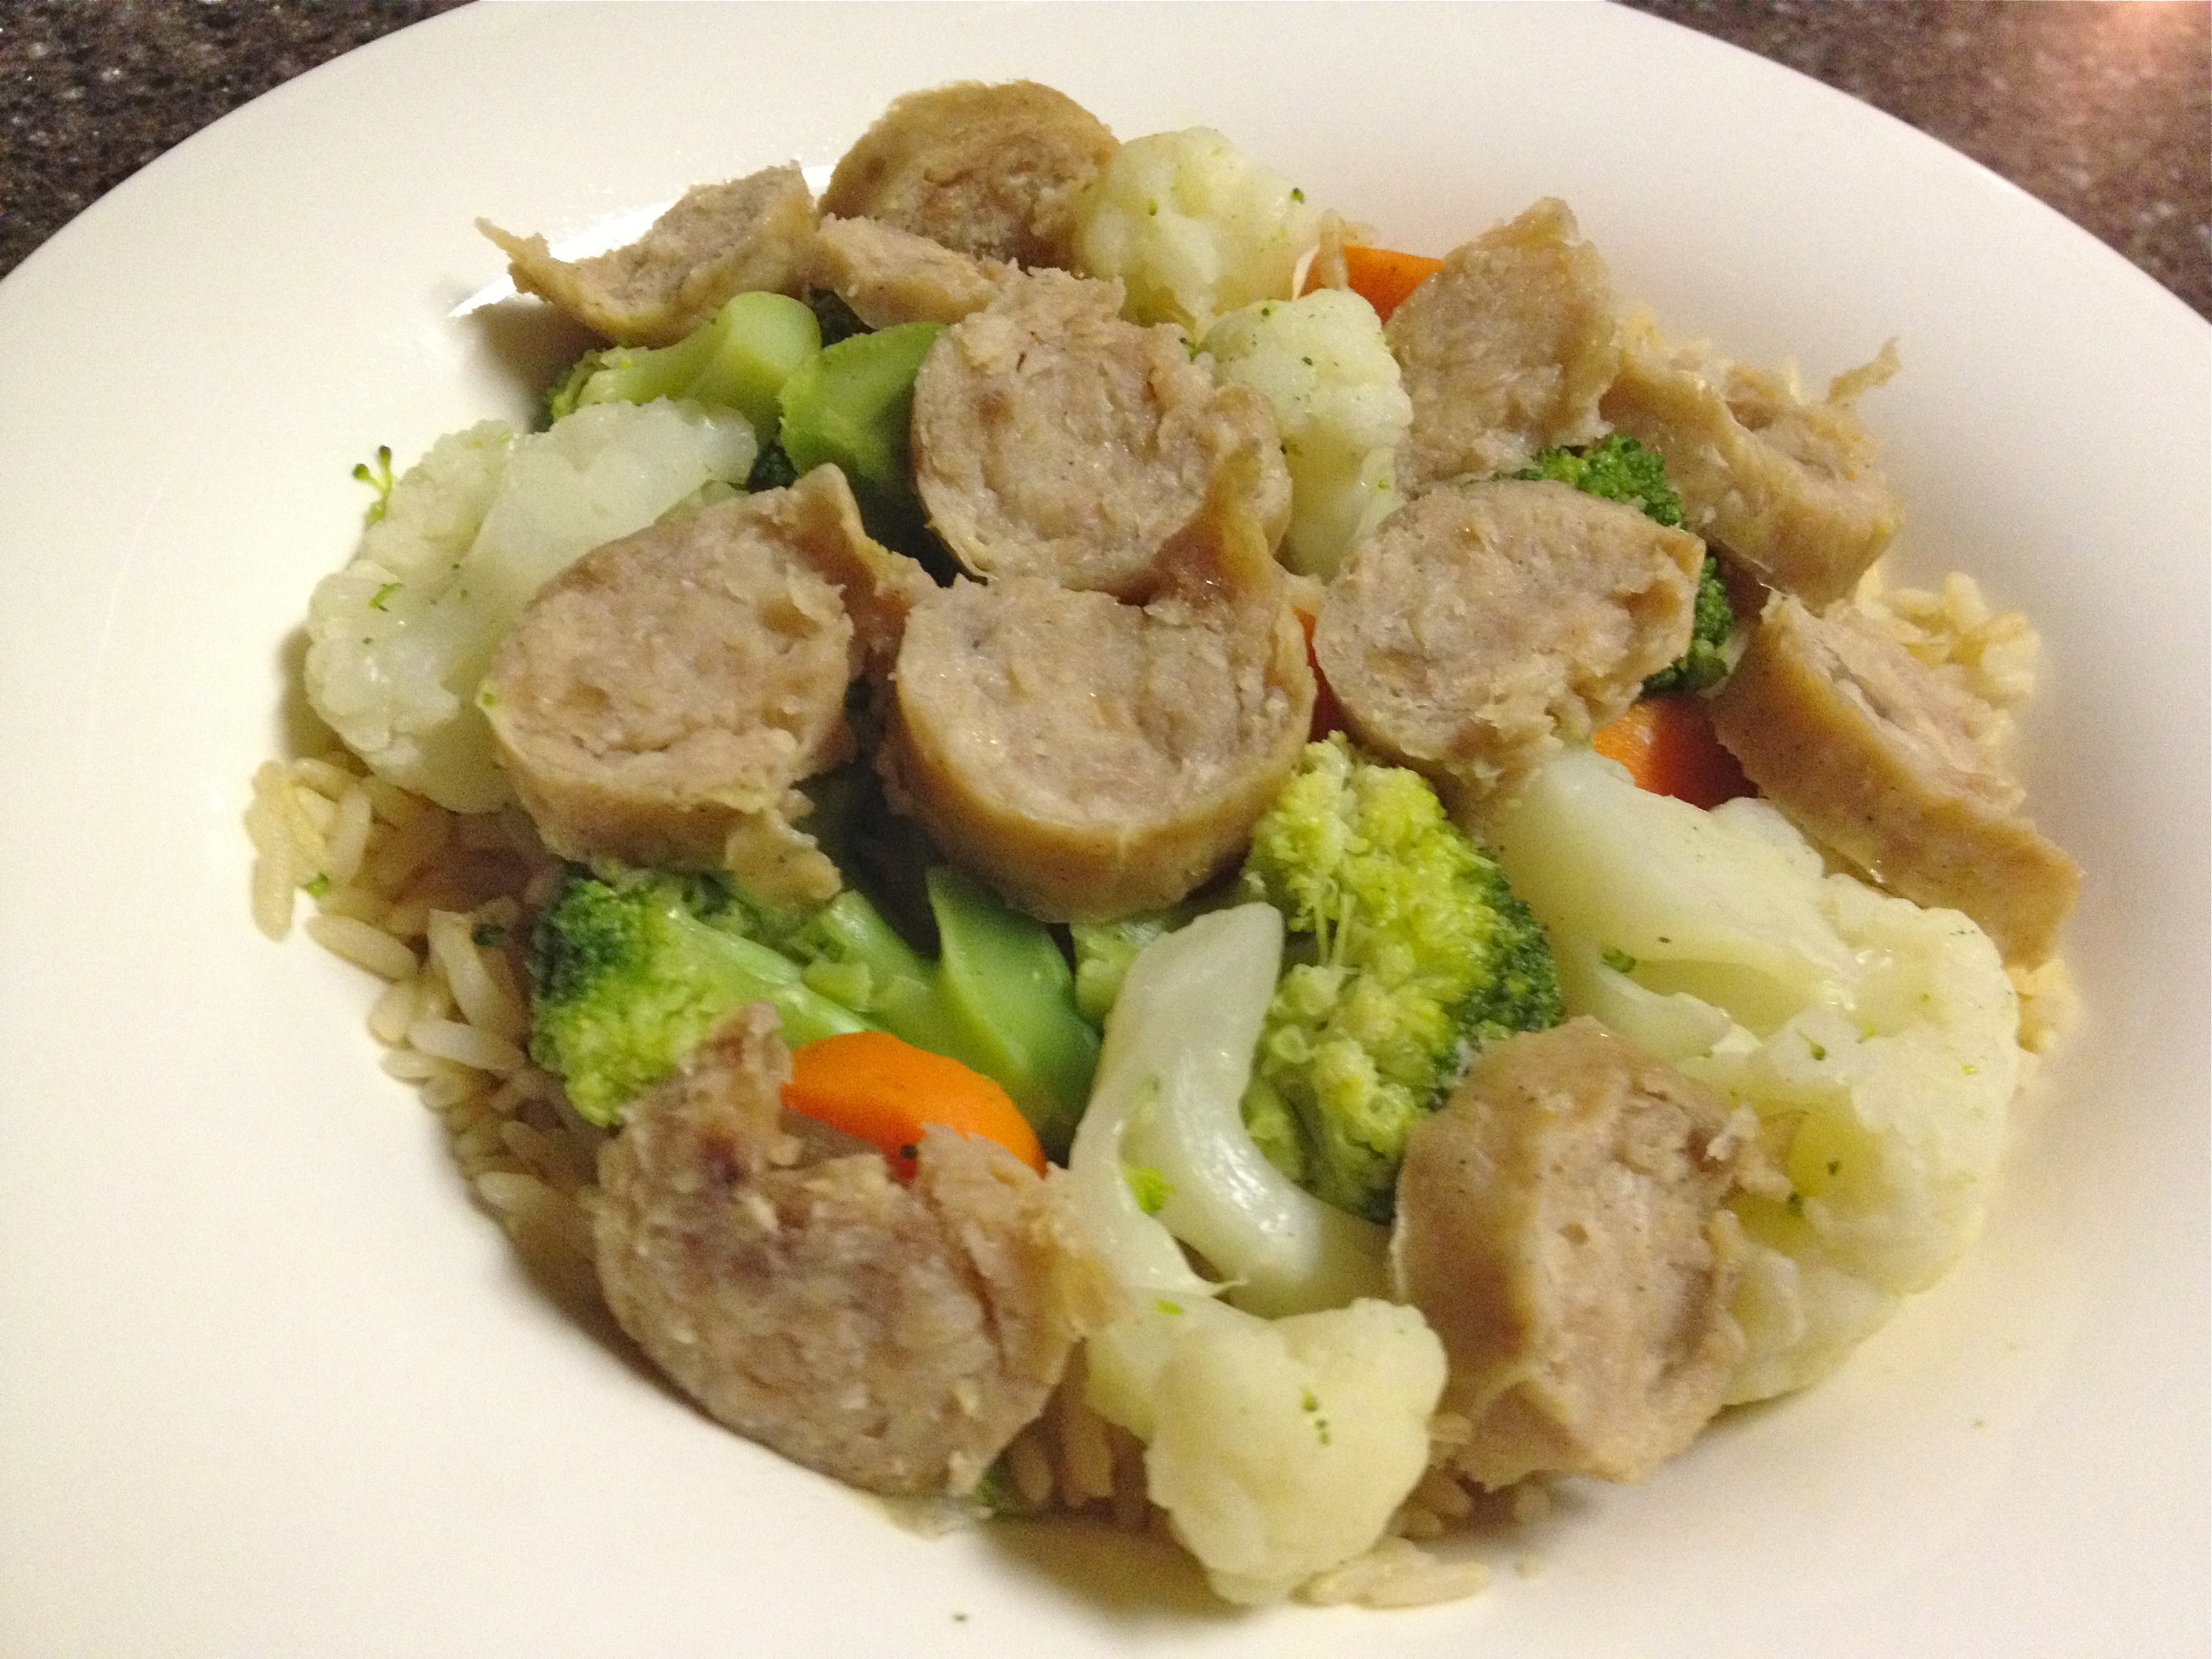 Chicken Sausage and veggies over rice